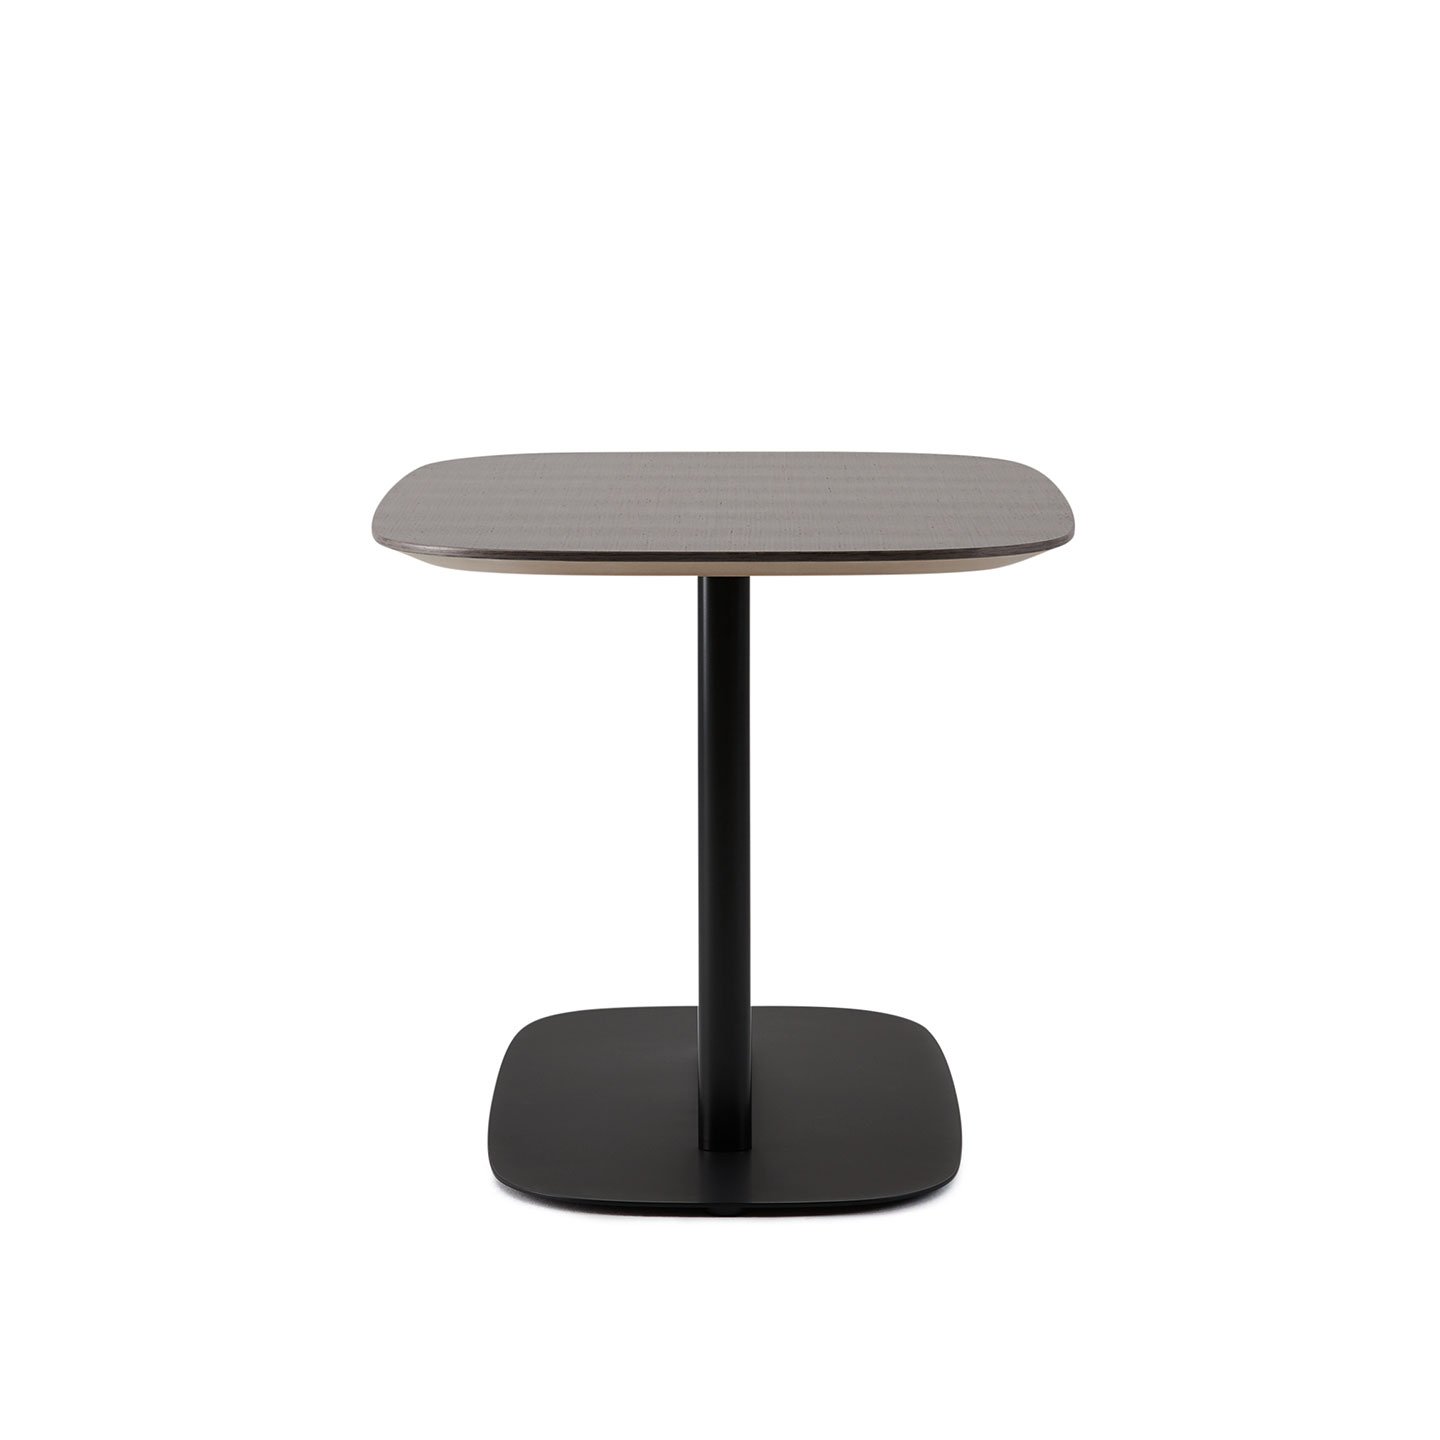 Haworth Pip Collaborative Table in grey with black base